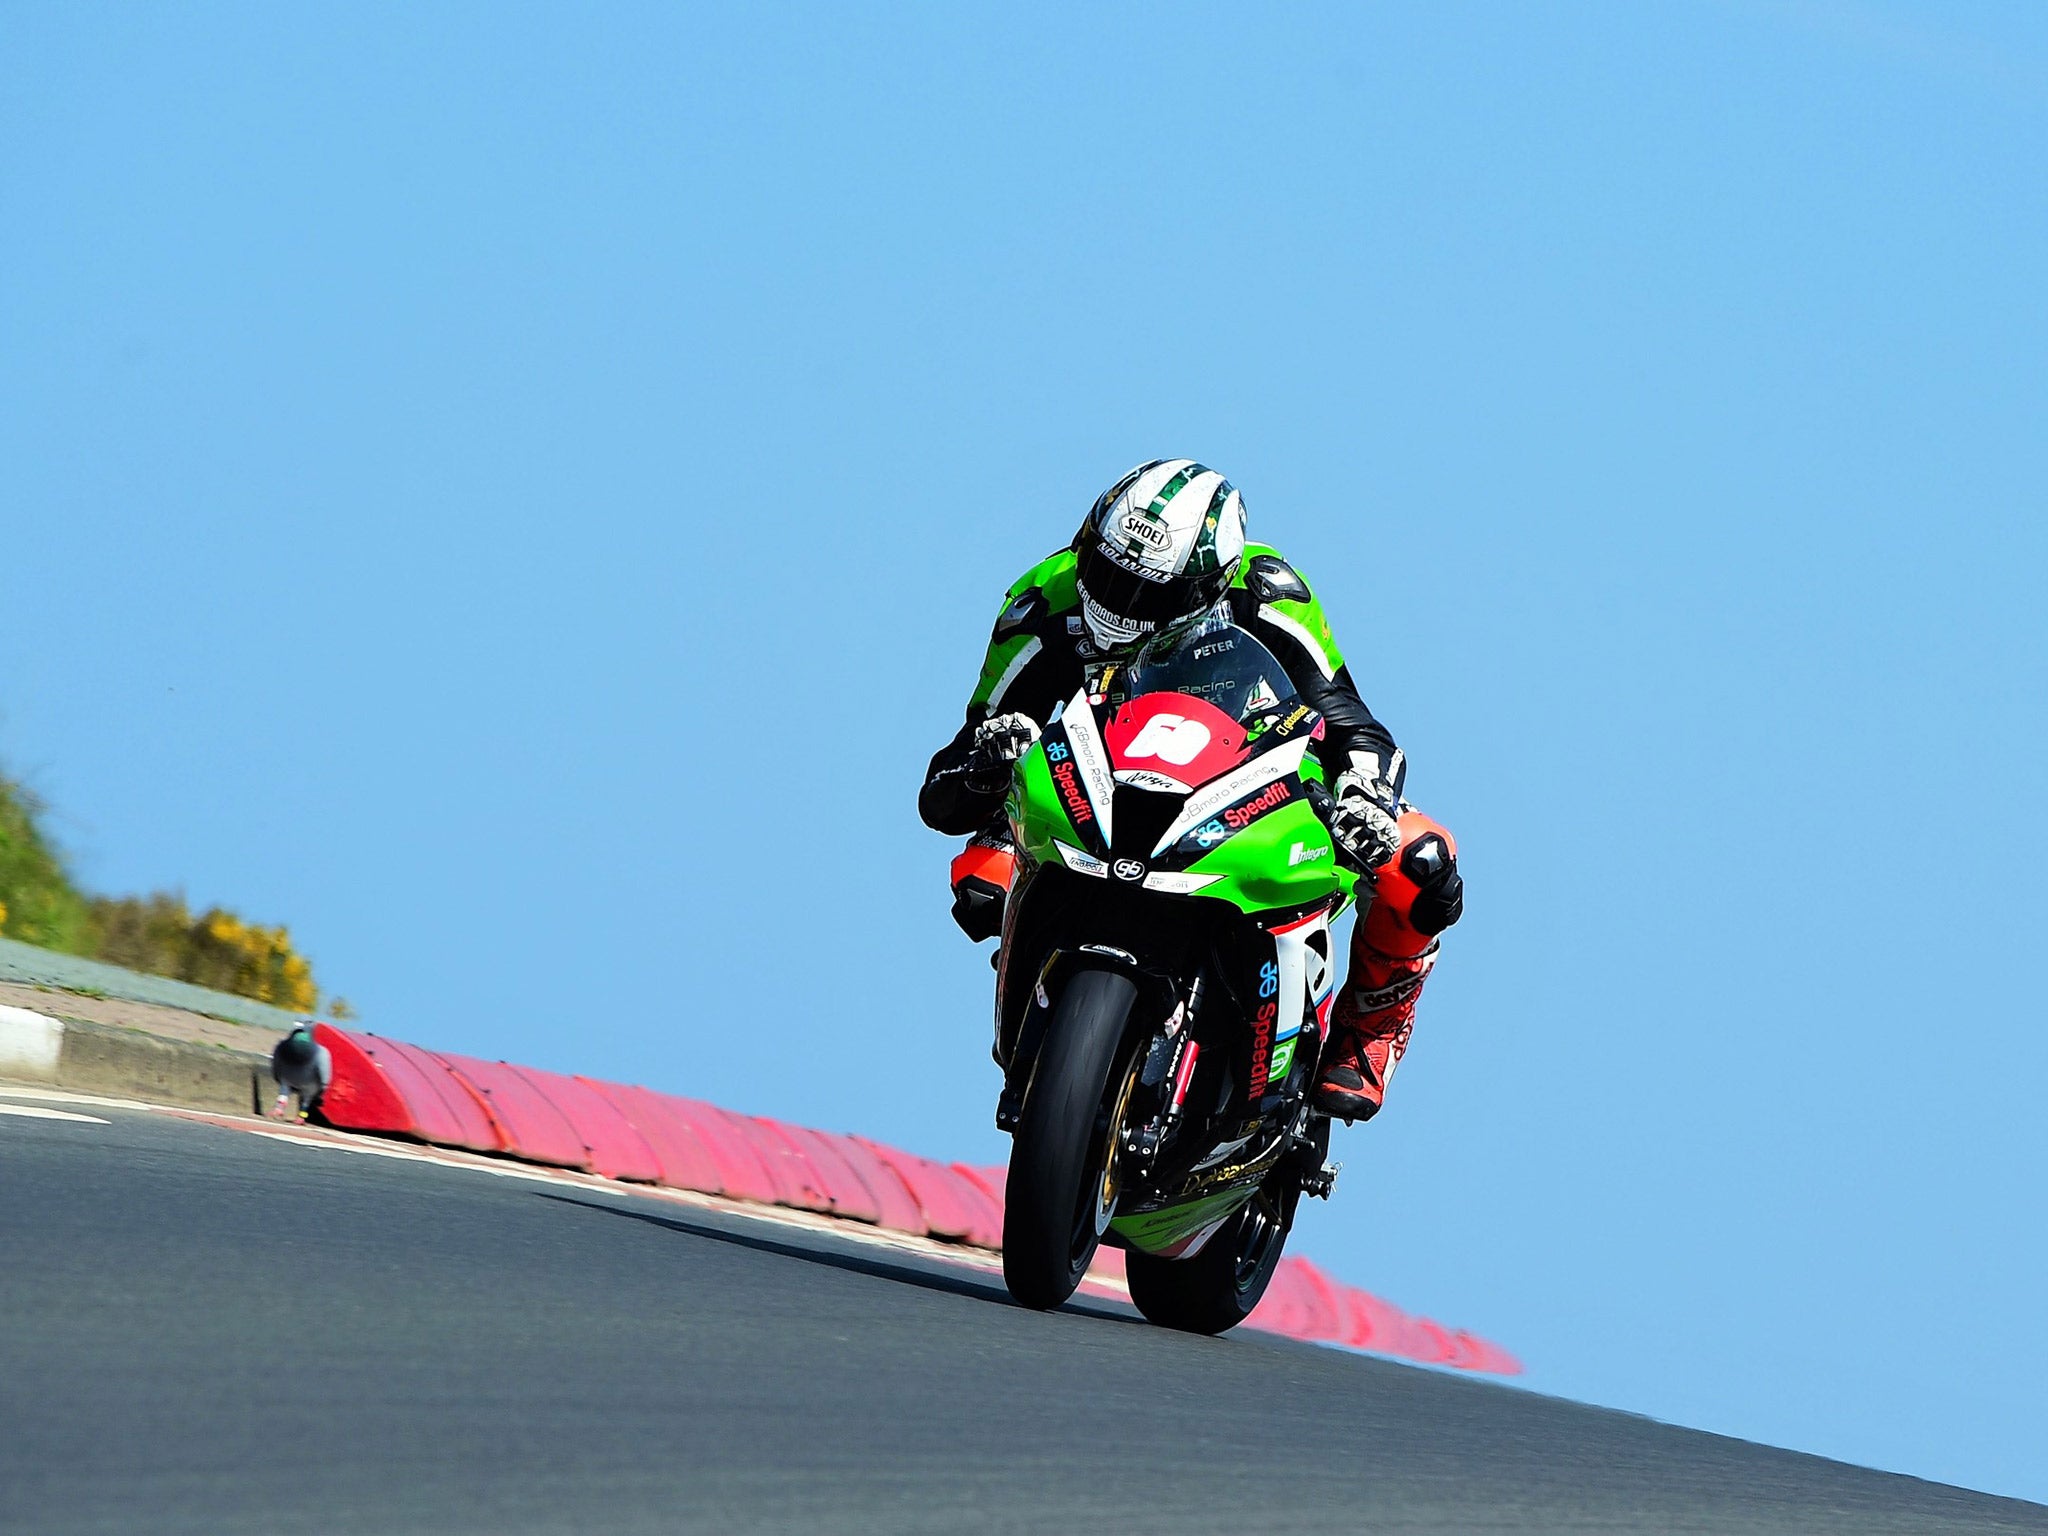 Speeds around the North West 200 and Isle of Man TT exceed 200mph